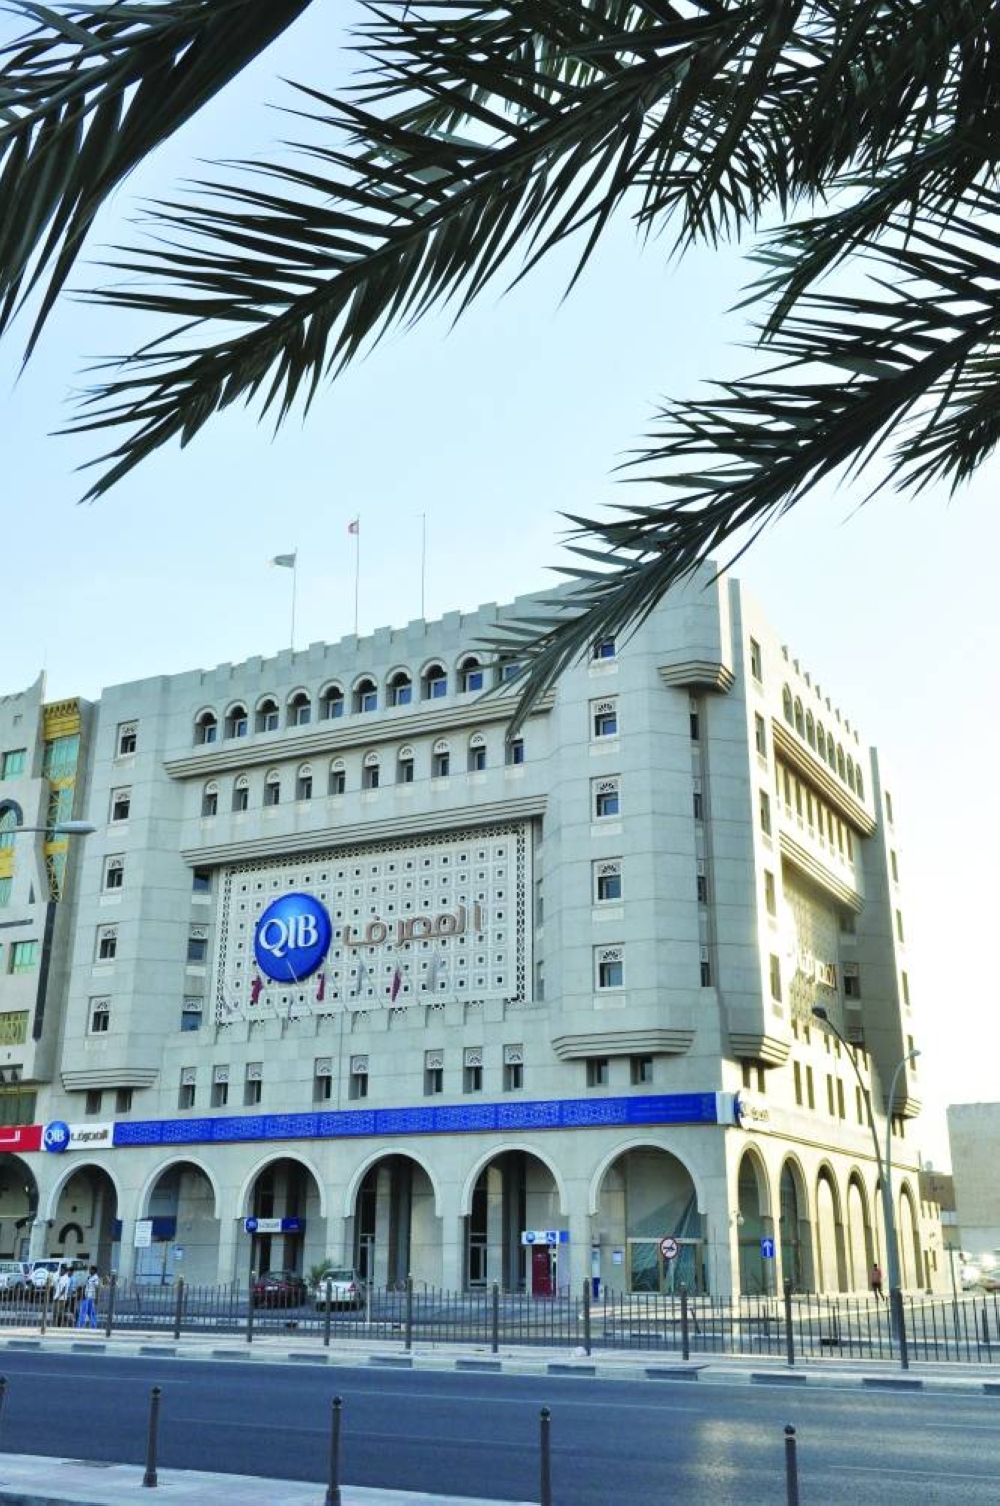 QIB has continued to demonstrate its leadership in the local banking sector, solidifying its position as the largest Islamic and largest private bank in Qatar